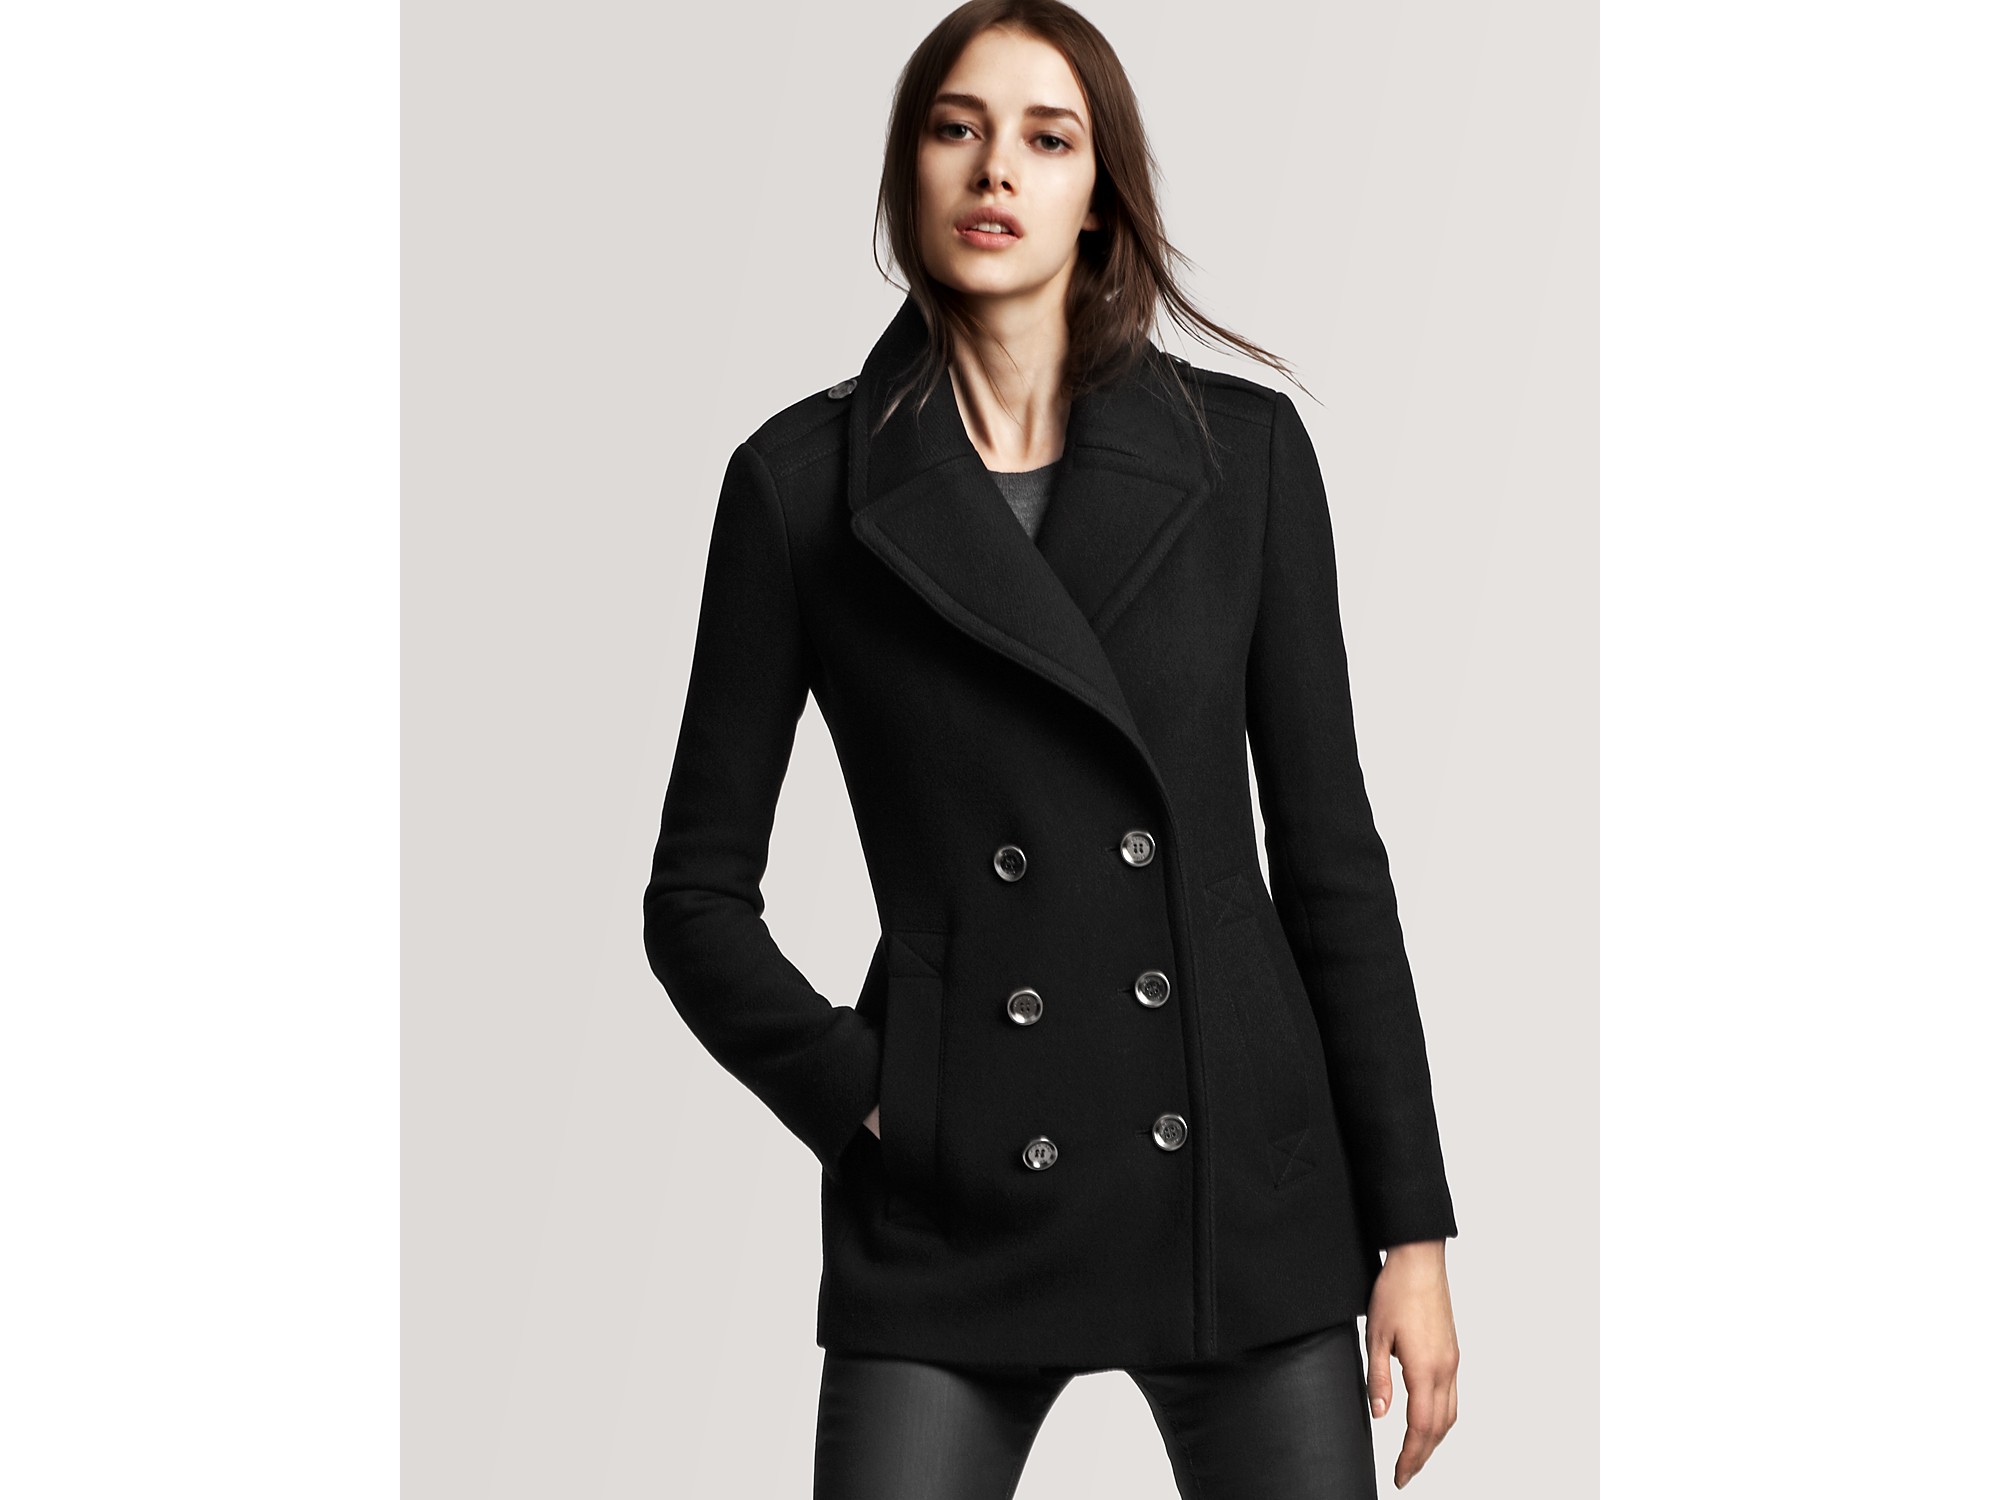 burberry pea coat womens sale Online Shopping for Women, Men, Kids Fashion  & Lifestyle|Free Delivery & Returns! -